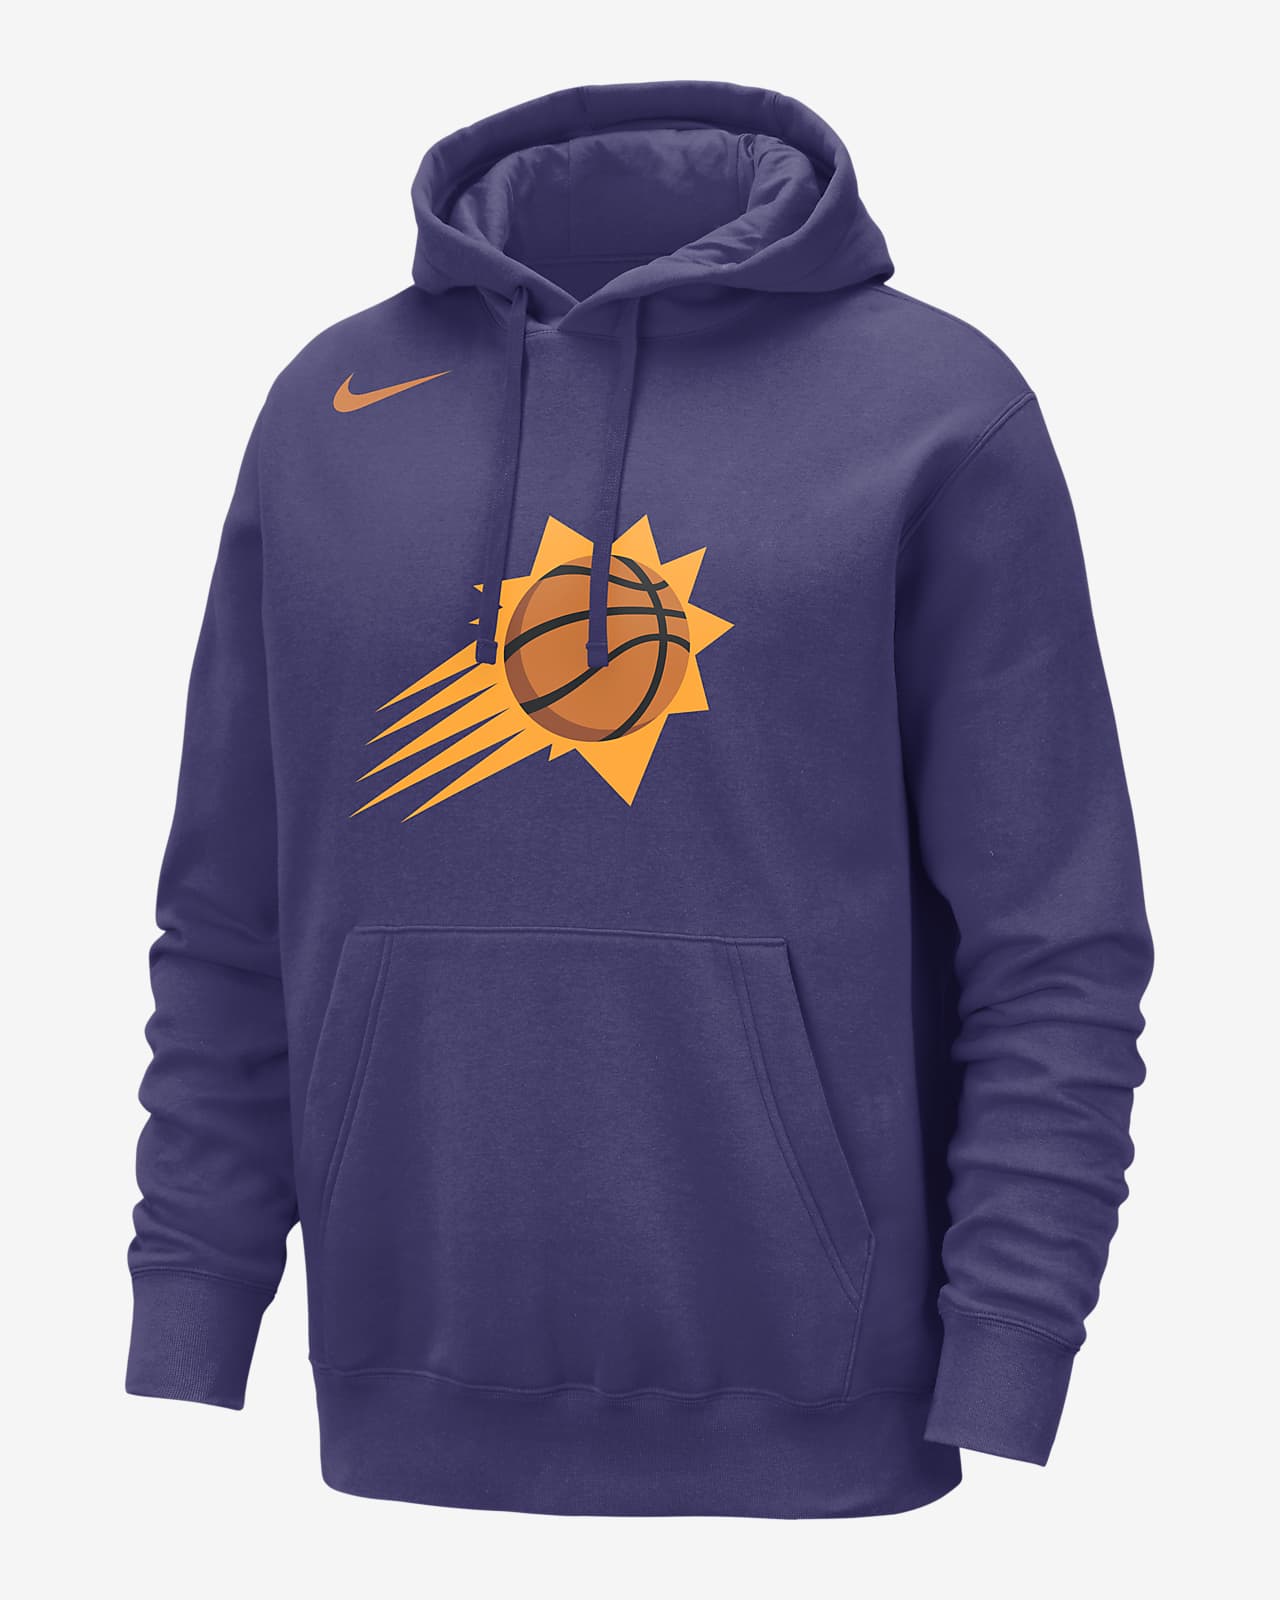 https://static.nike.com/a/images/t_PDP_1280_v1/f_auto,q_auto:eco/3d815dd2-505d-49d9-9aad-8e54e3e11e71/phoenix-suns-club-nba-pullover-hoodie-cBnwKS.png